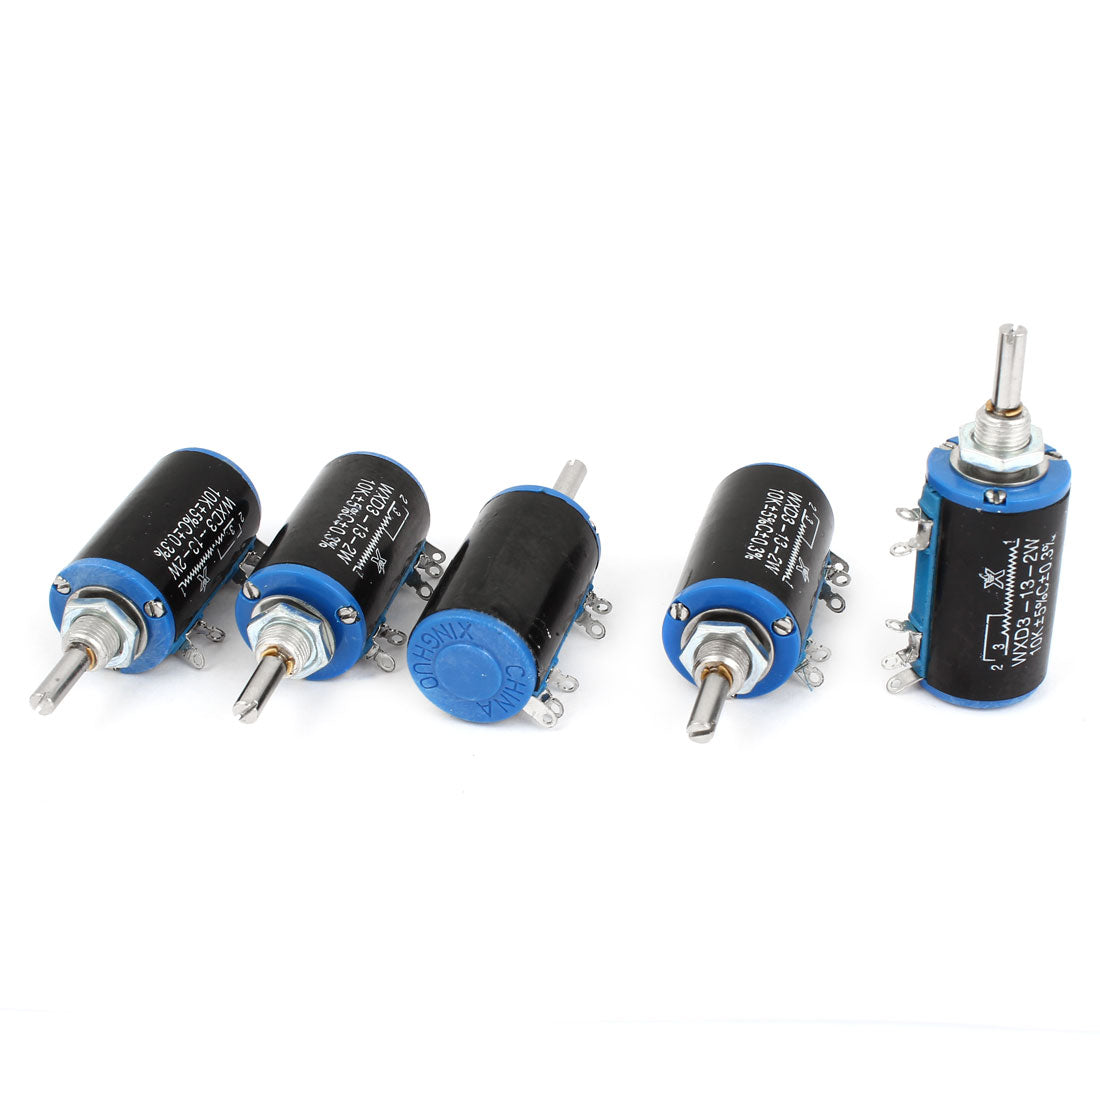 uxcell Uxcell WXD3-13 10K ohm 2W 4 Pin Terminals 10 Turn Wire Wound Potentiometer 5pcs